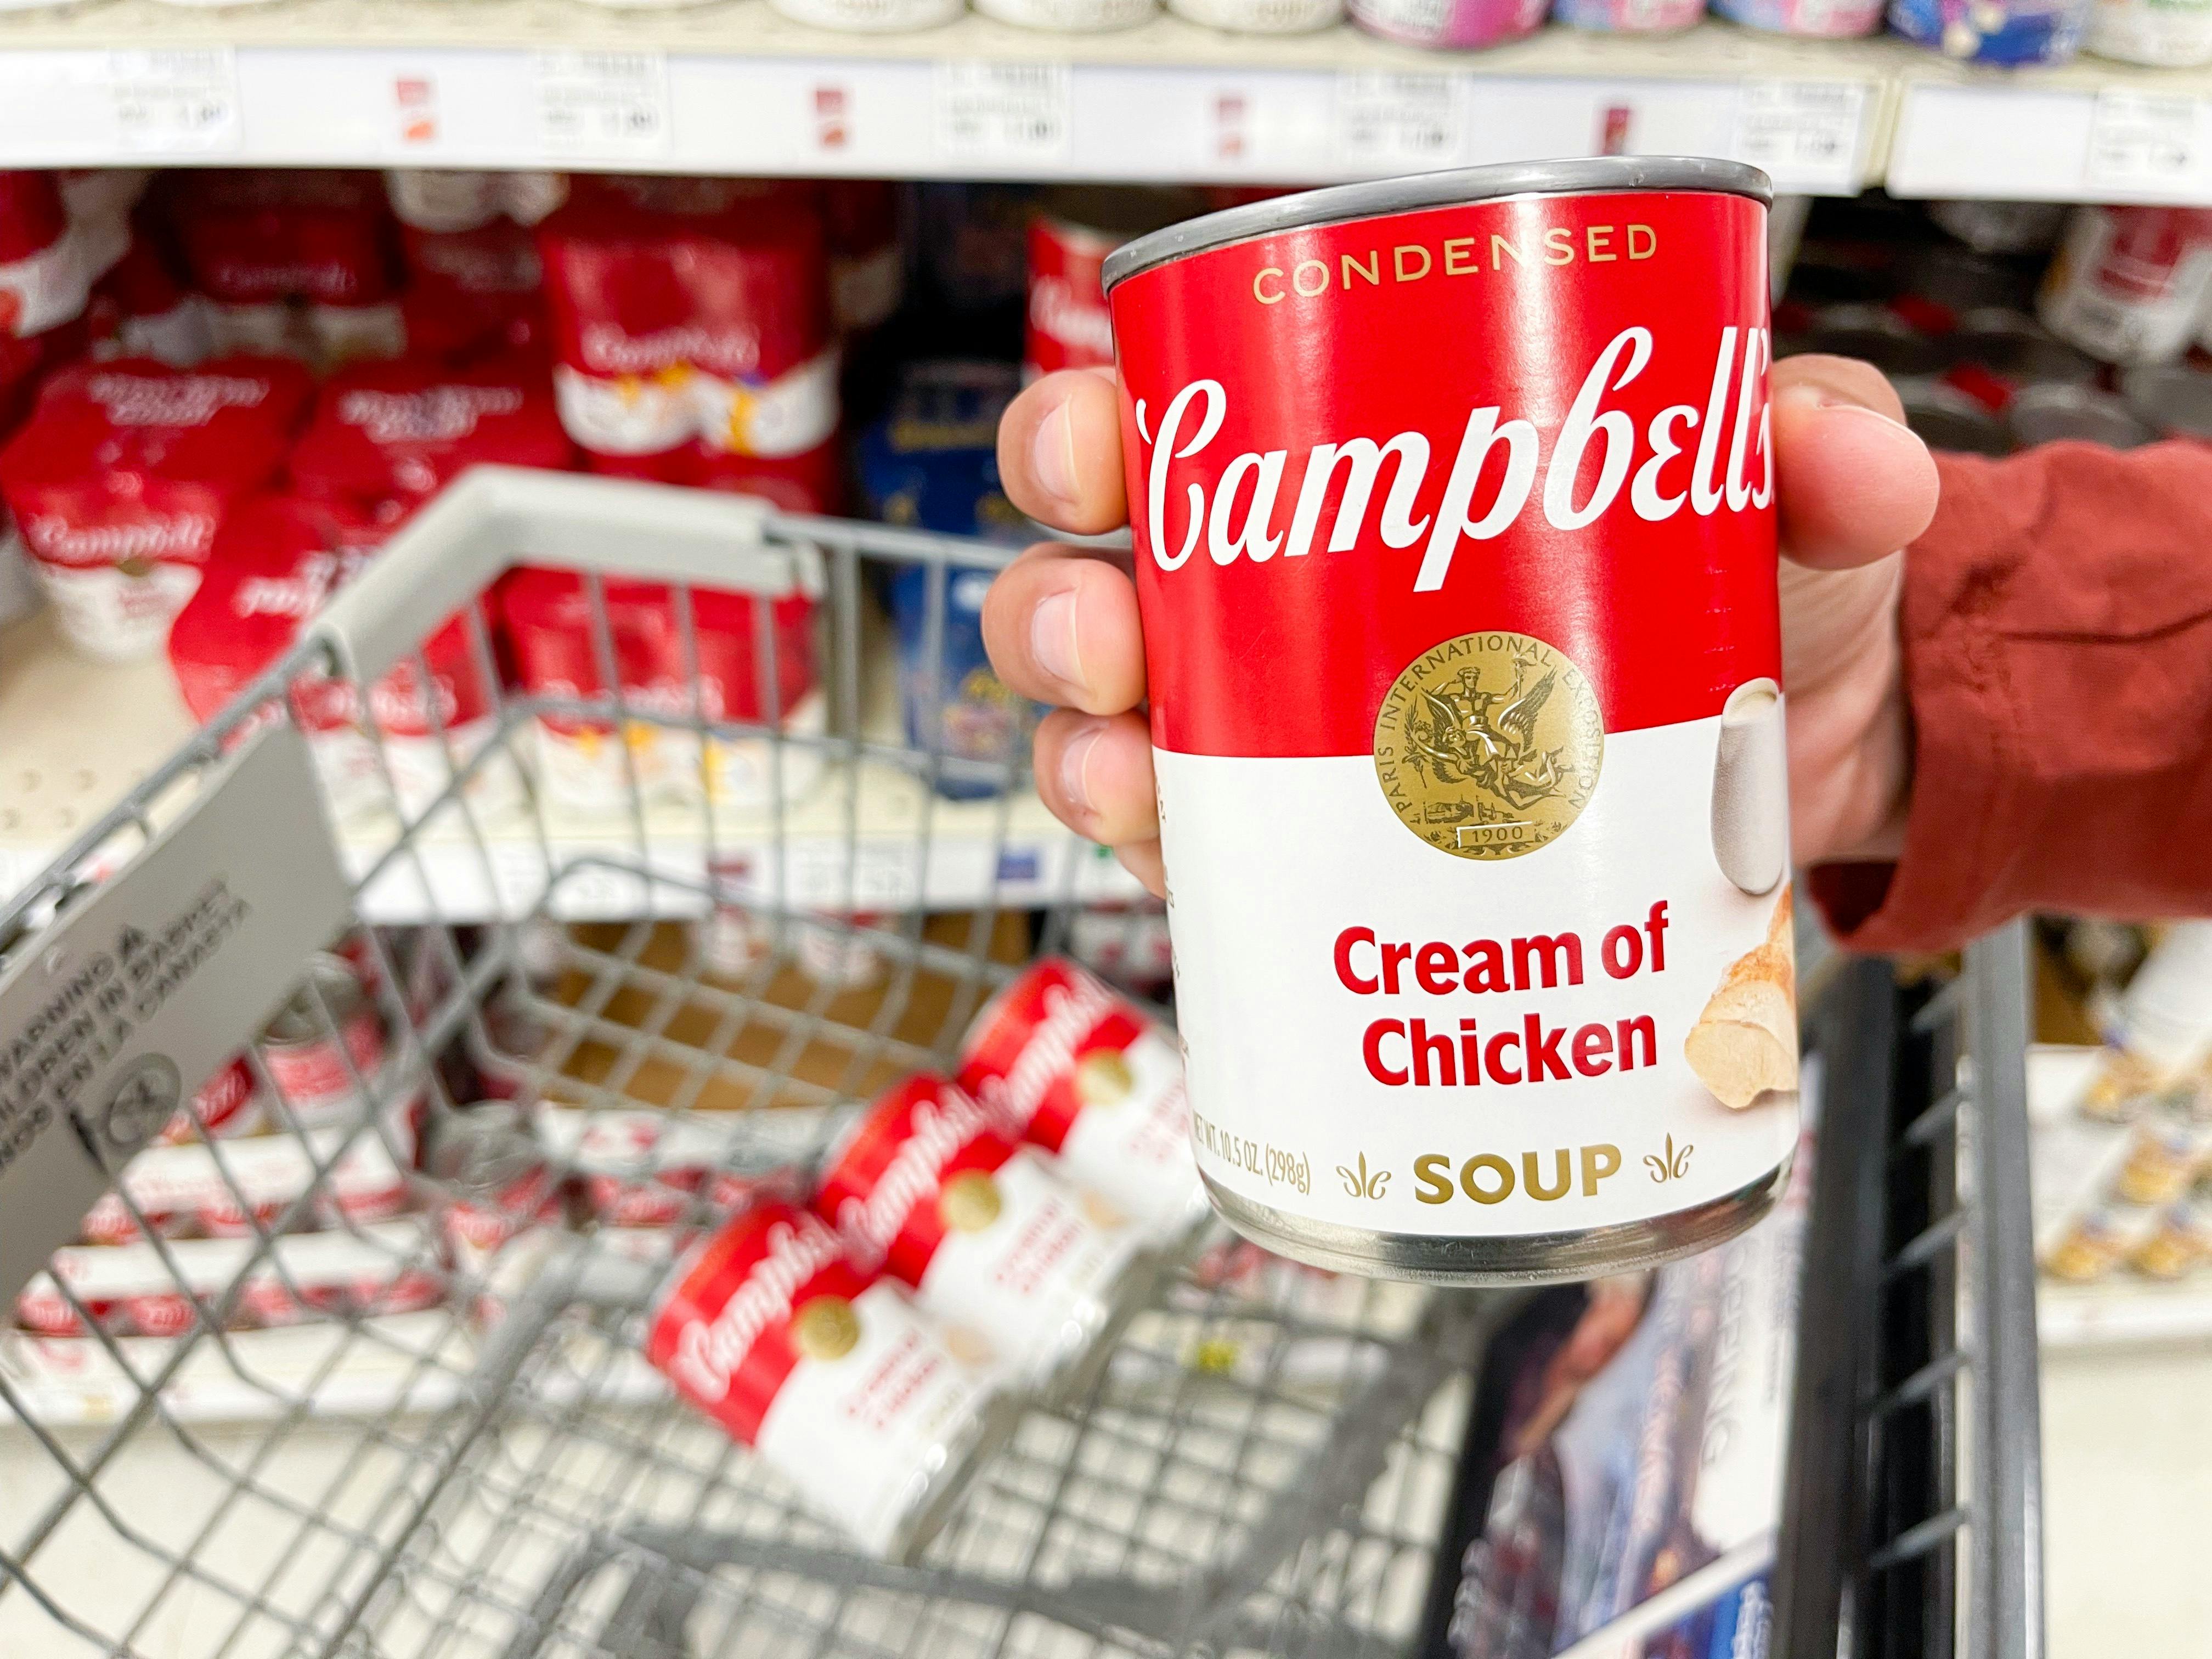 a person holding a can of soup along with other cans in cart